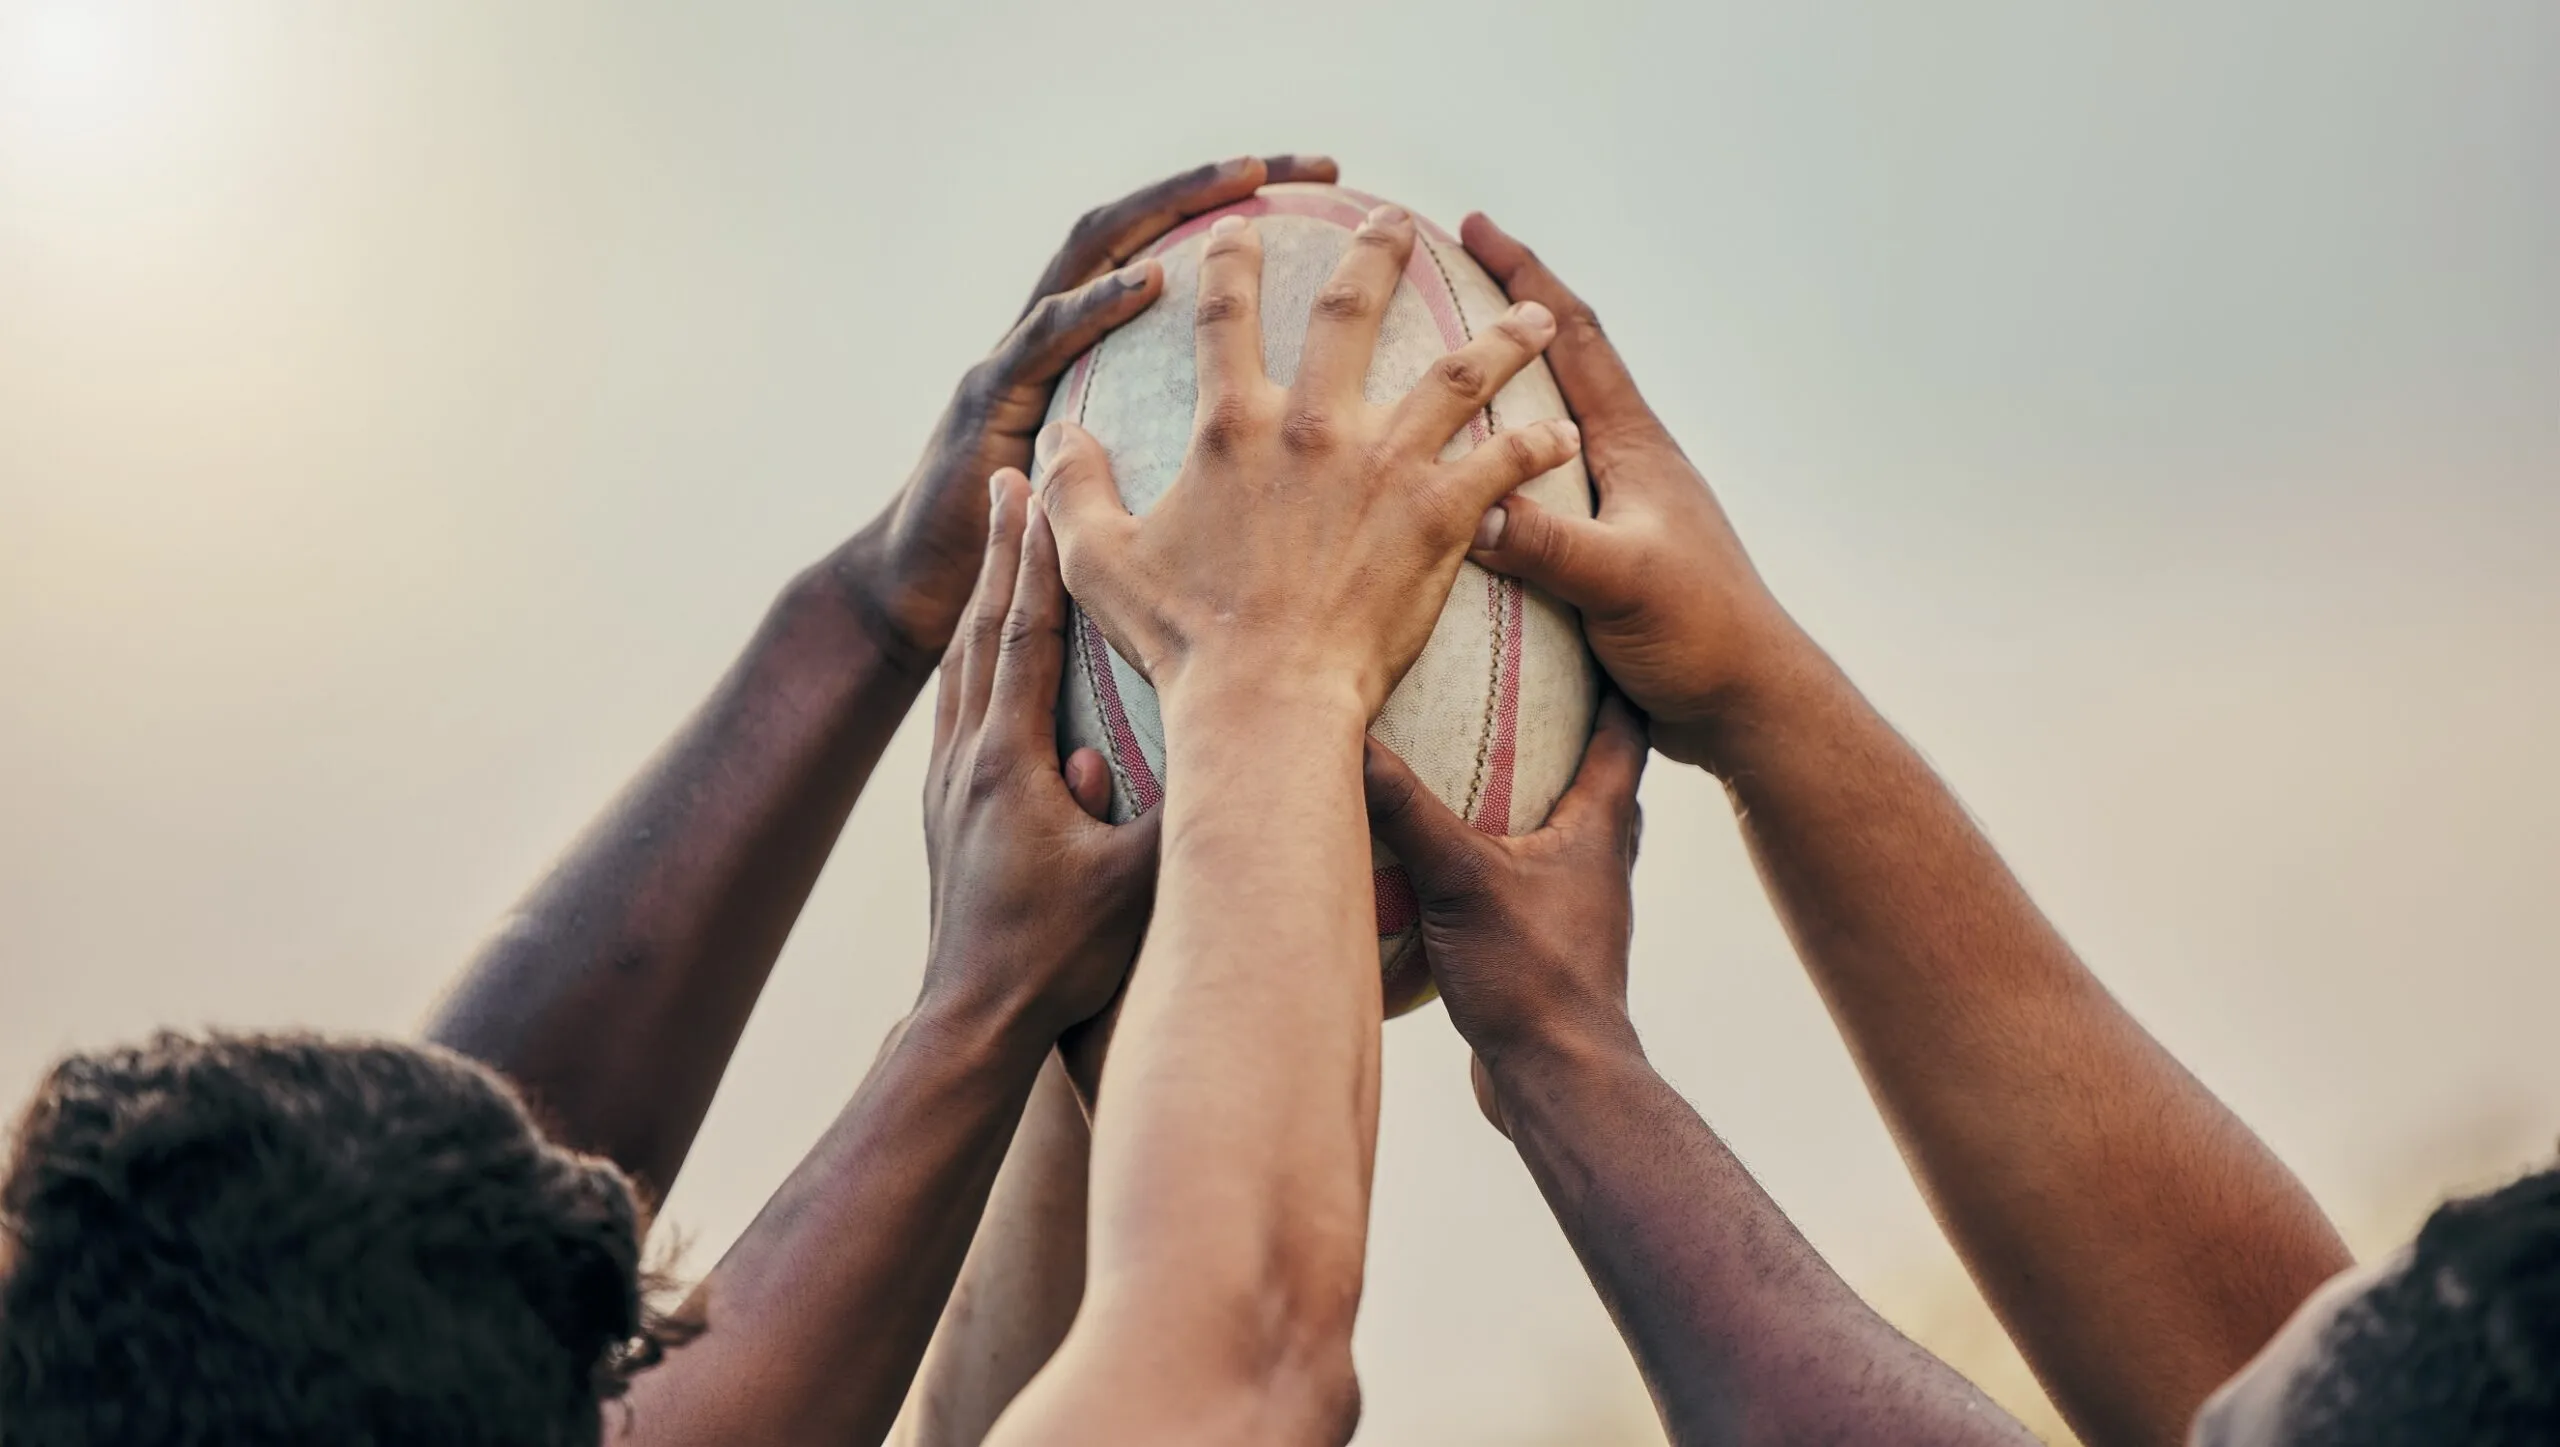 Diversity,,team,and,hands,together,in,sports,on,rugby,ball